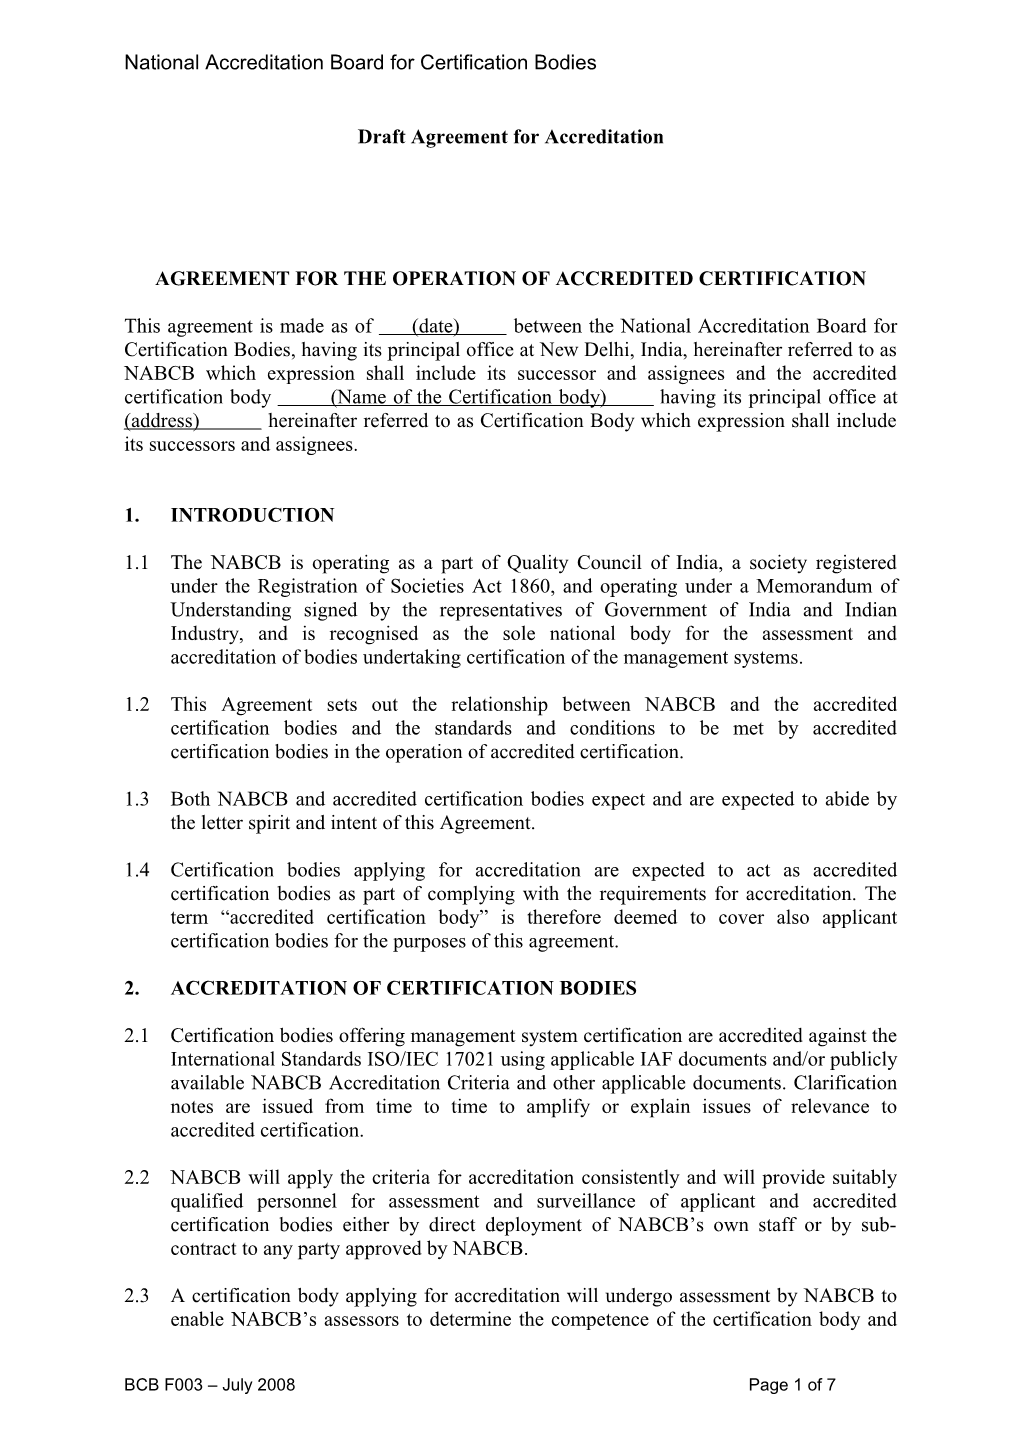 Agreement for the Operation of Accredited Certification